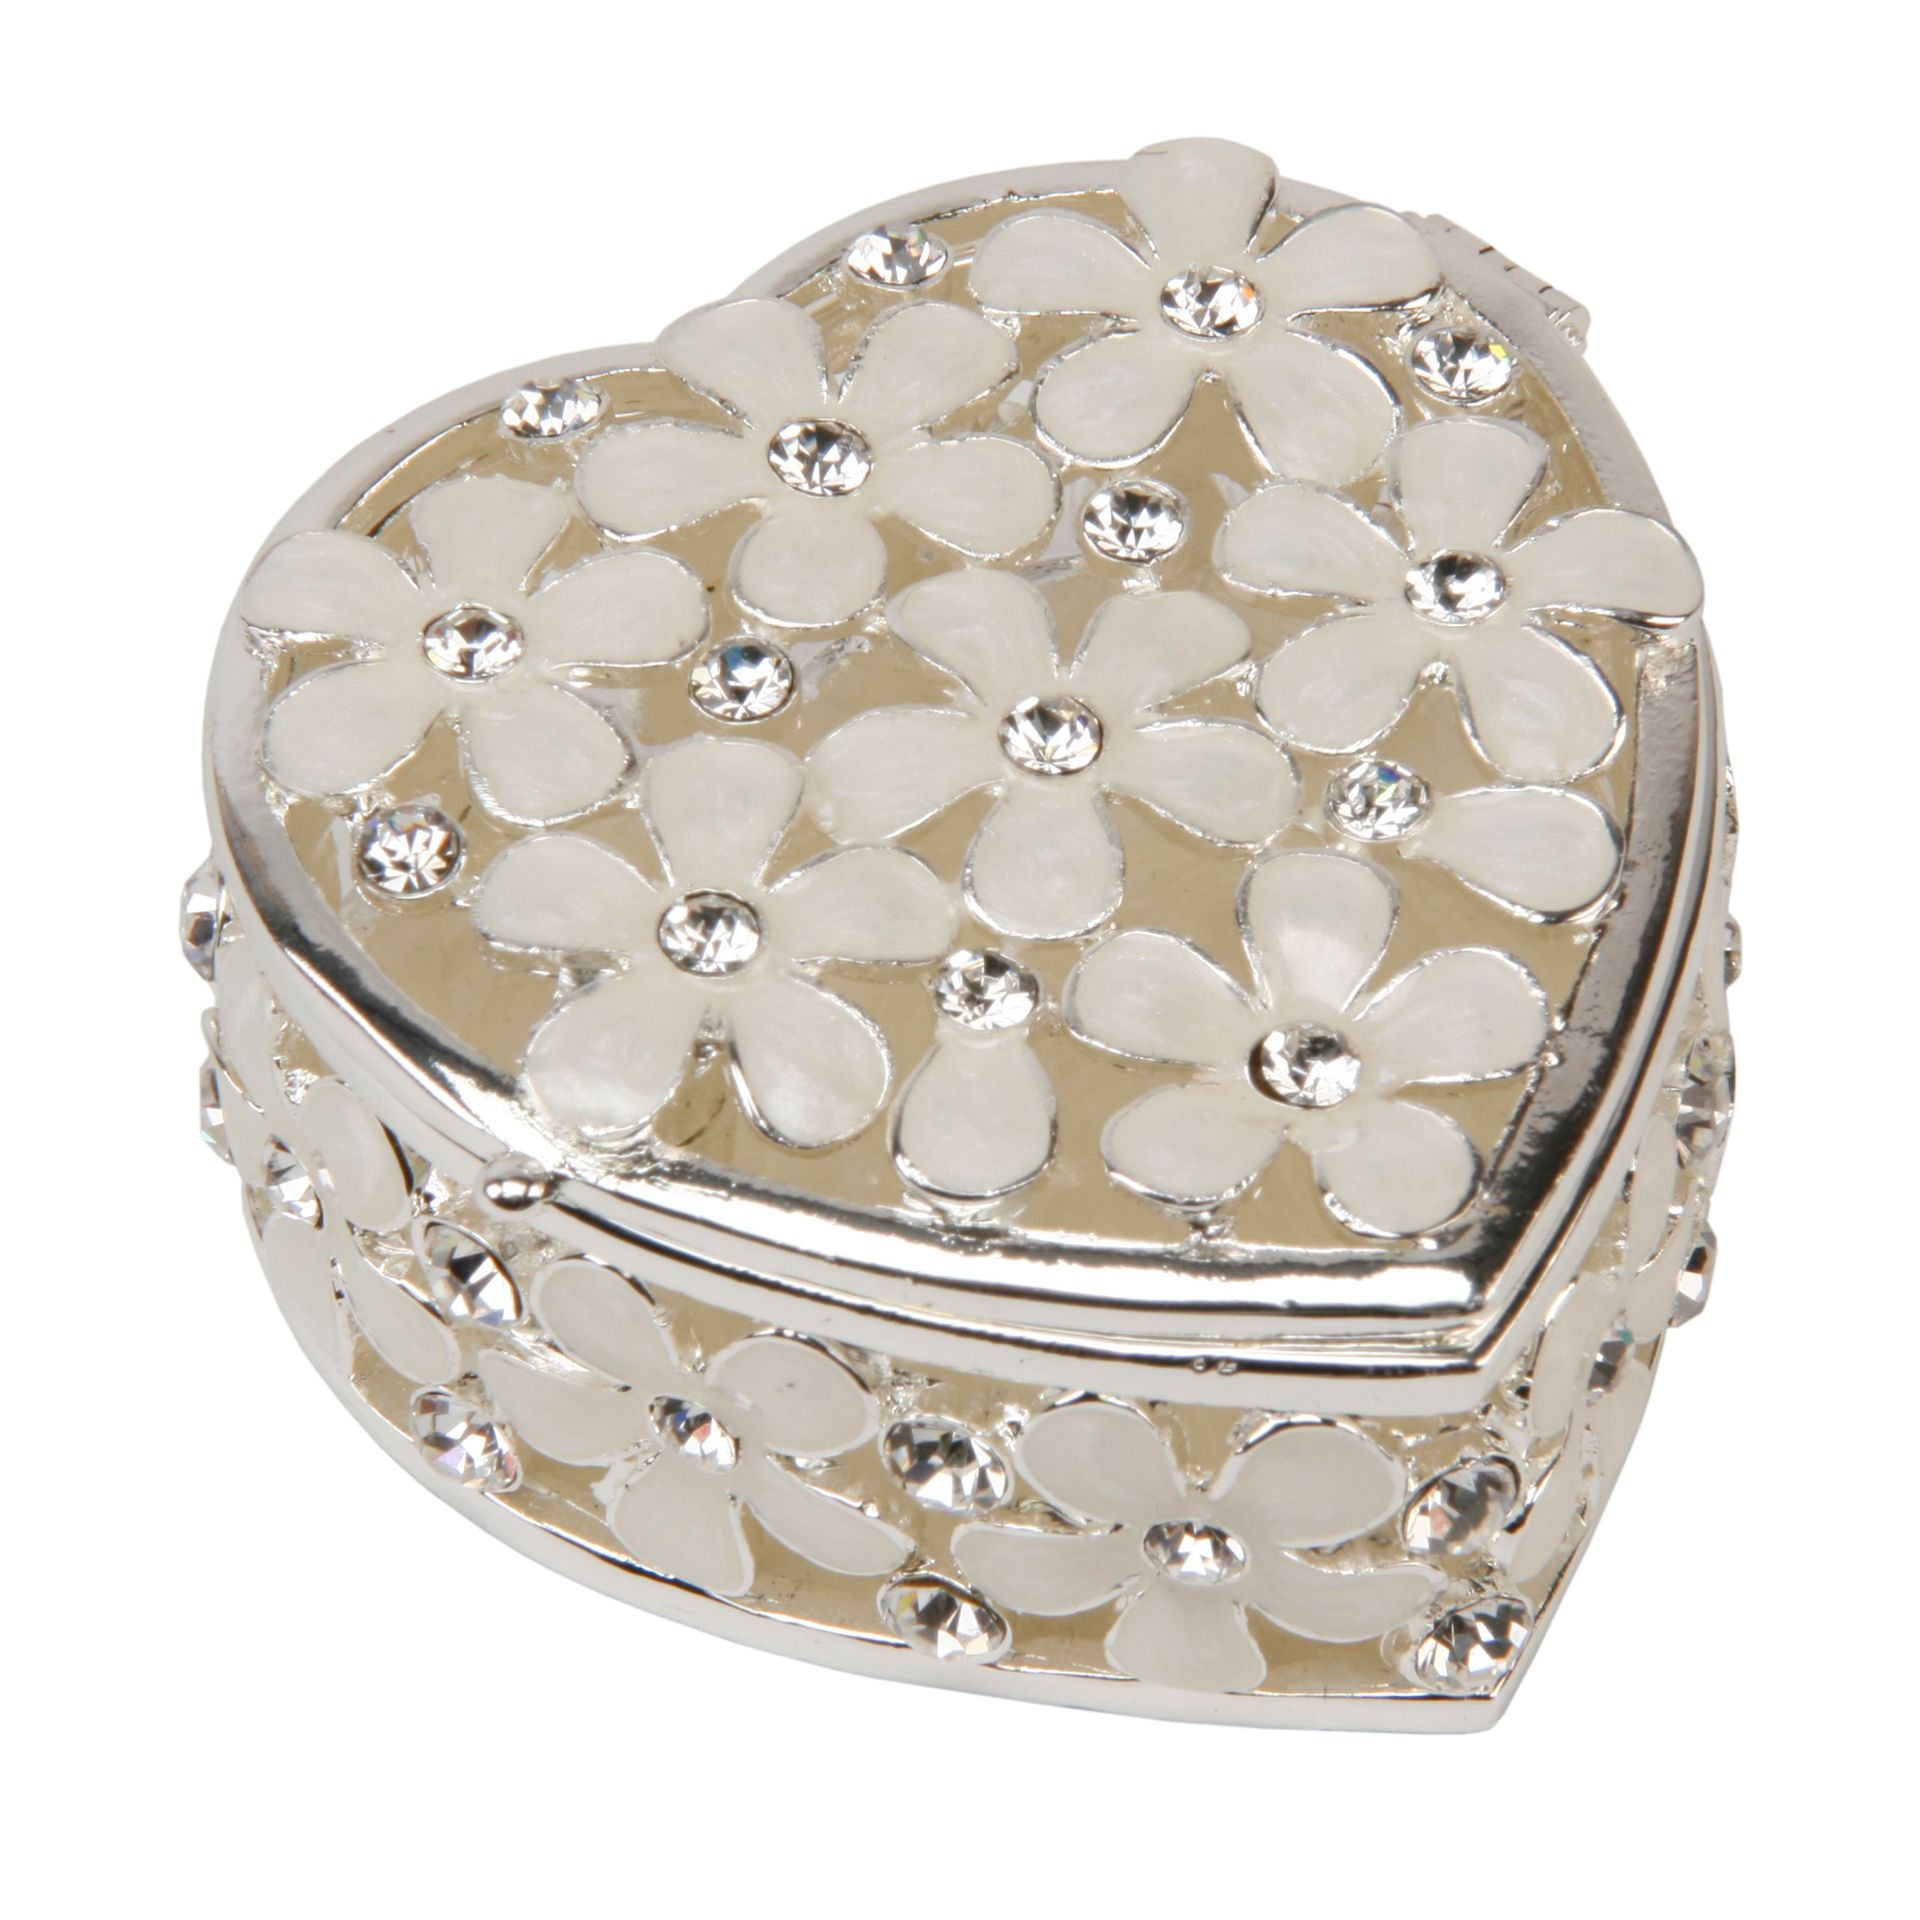 Silver-Plated Heart-Shaped Jewellery Box